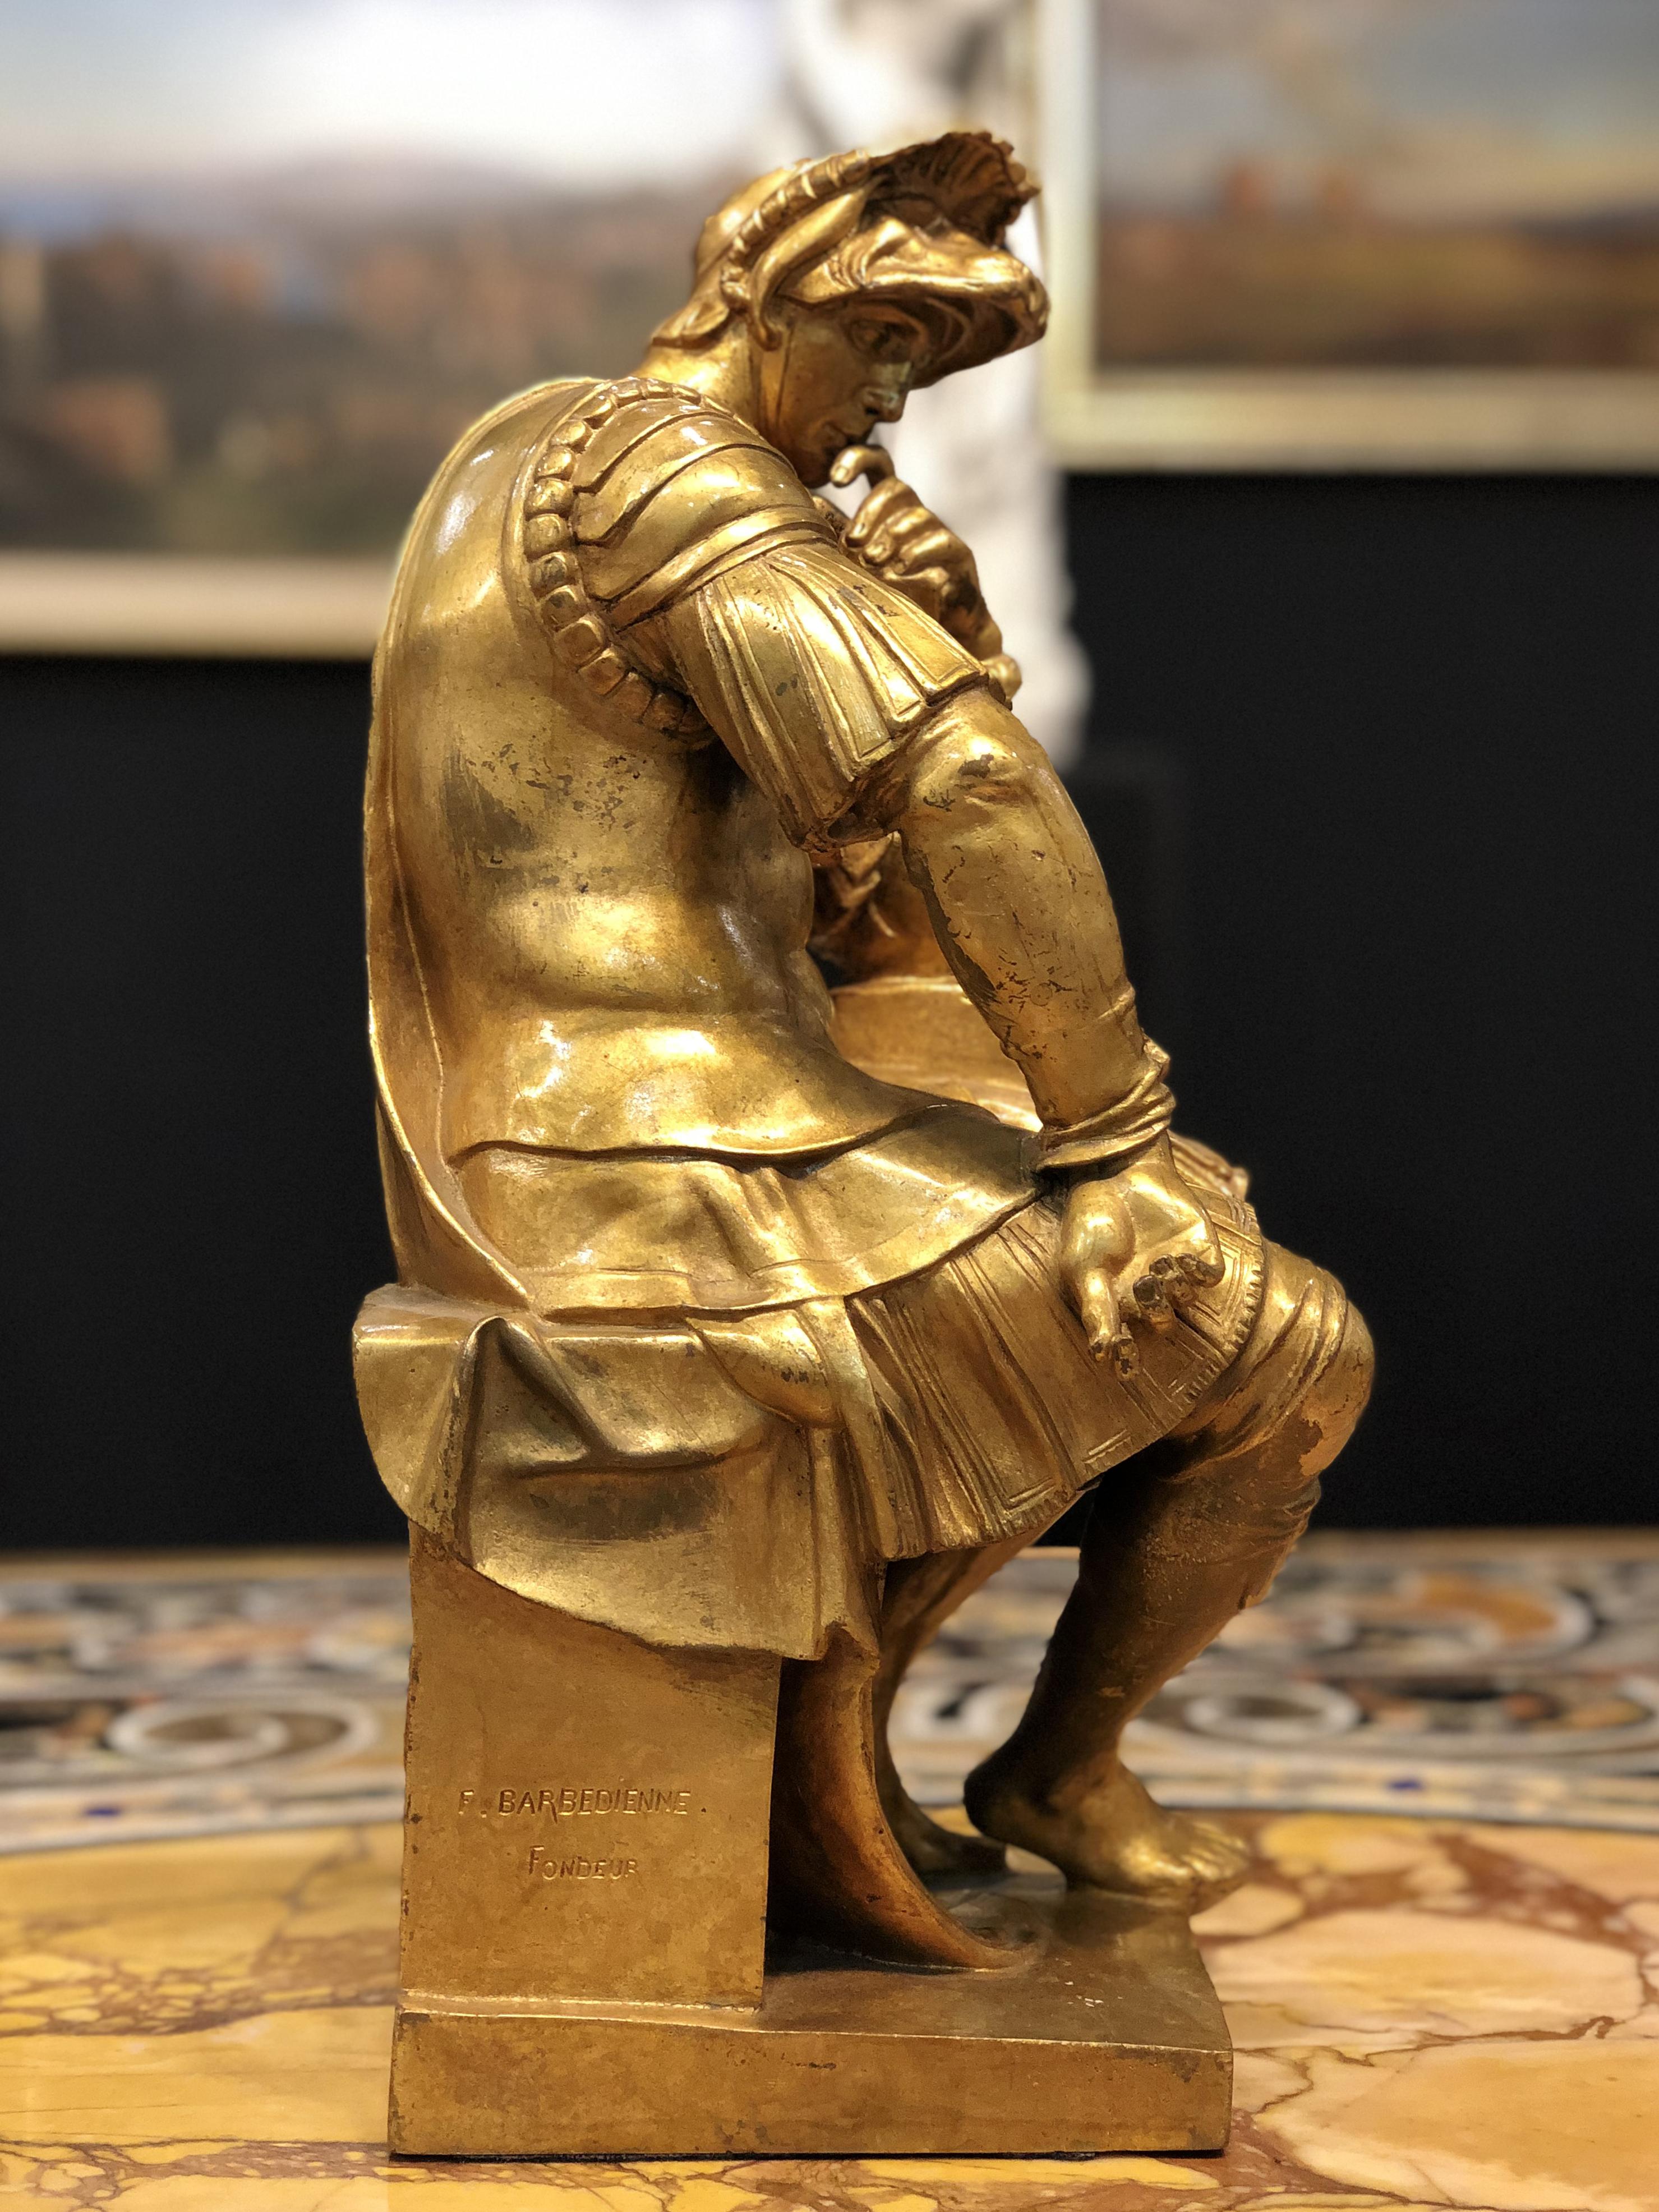 After Michelangelo, late 19th century Lorenzo de'Medici Urbino's Duke gilded bronze sculpture, foundry F. Barbedienne. France (as per inscription on the base). For the figure of Lorenzo de' Medici, Michelangelo gives us an image of a mysteriously